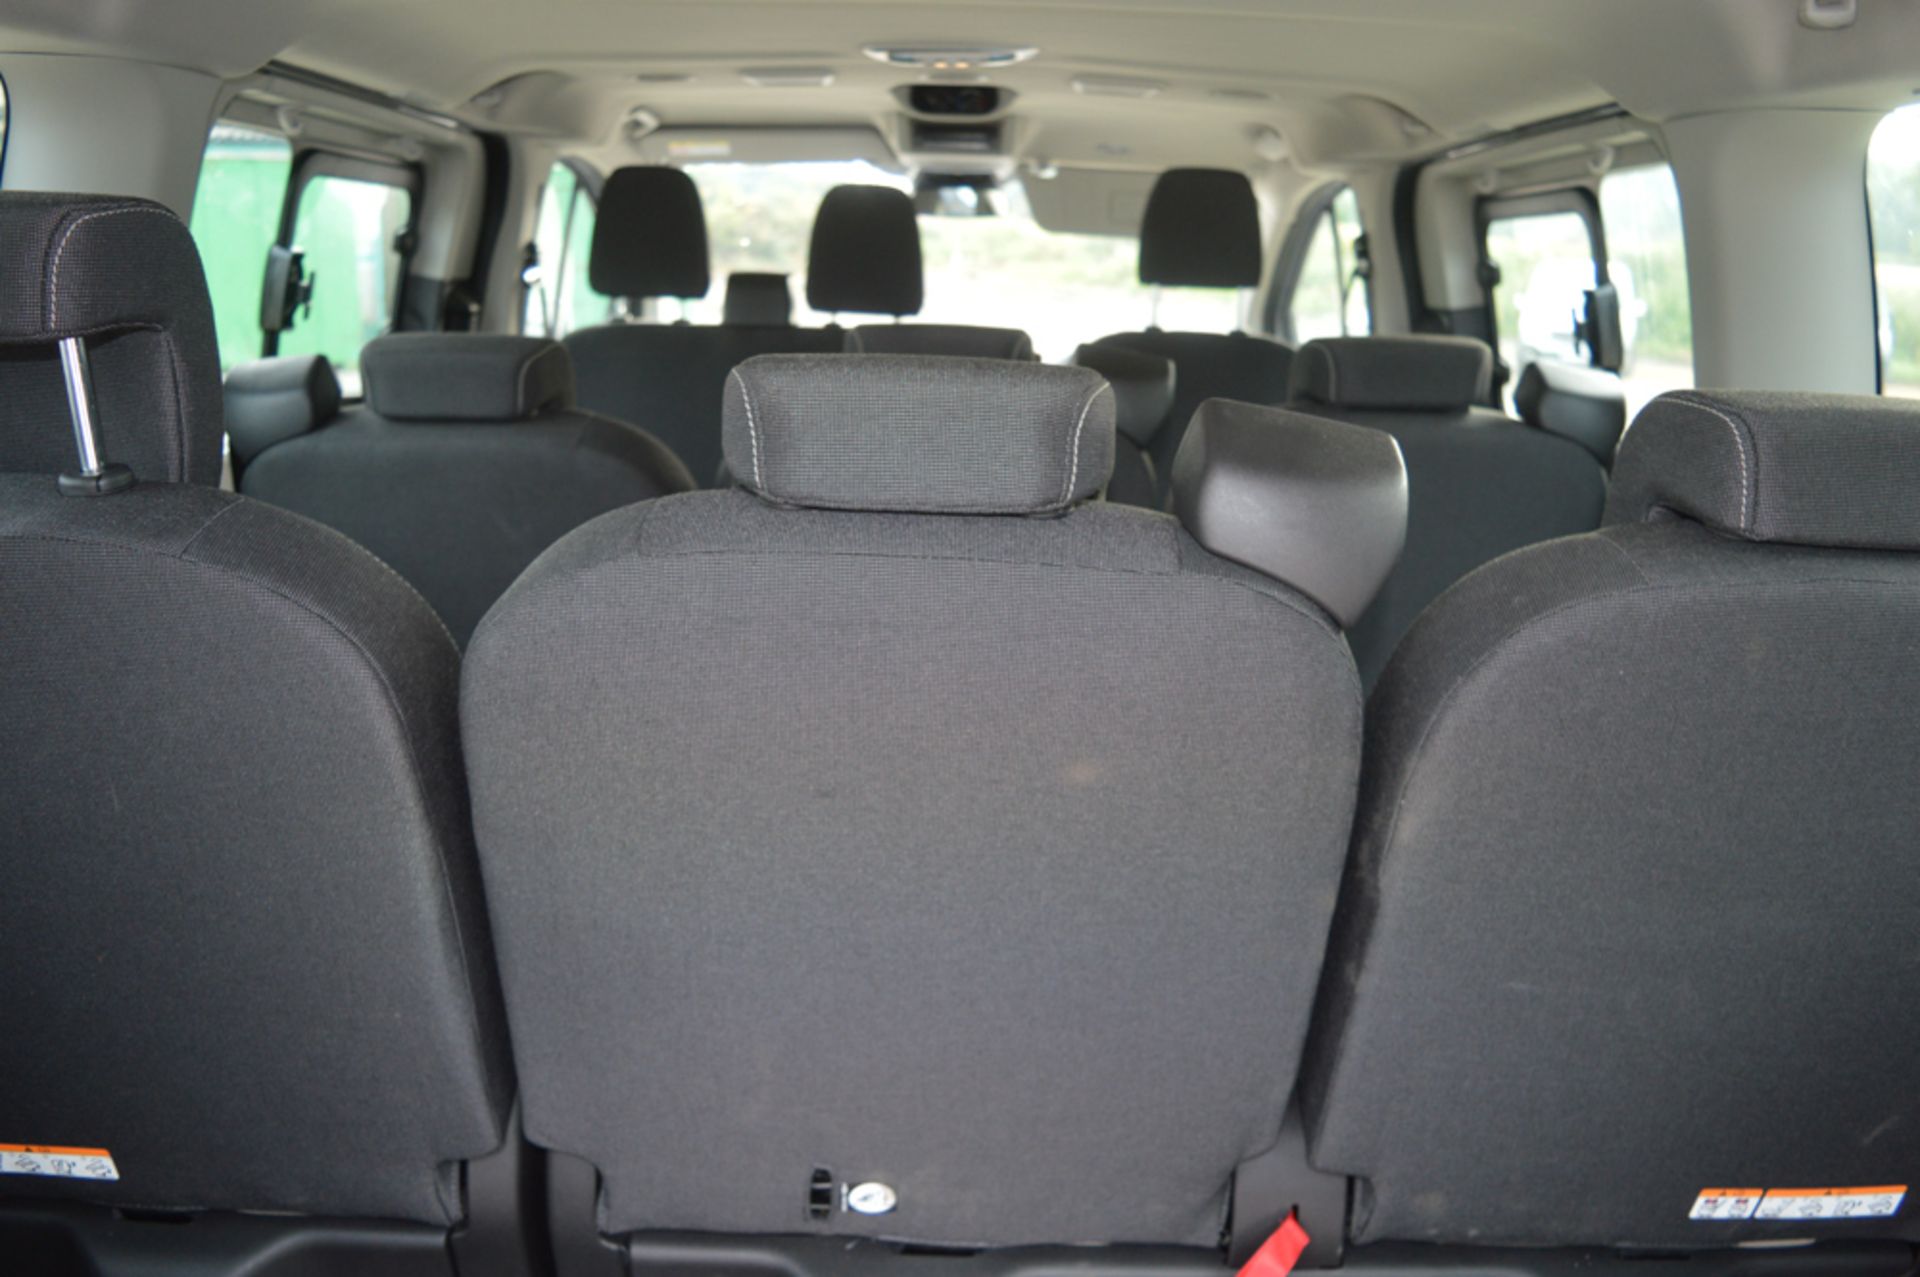 Ford Tourneo Custom 8 seat minibus  Registration Number: YD66 DRO  Date of Registration: 01/09/ - Image 8 of 15